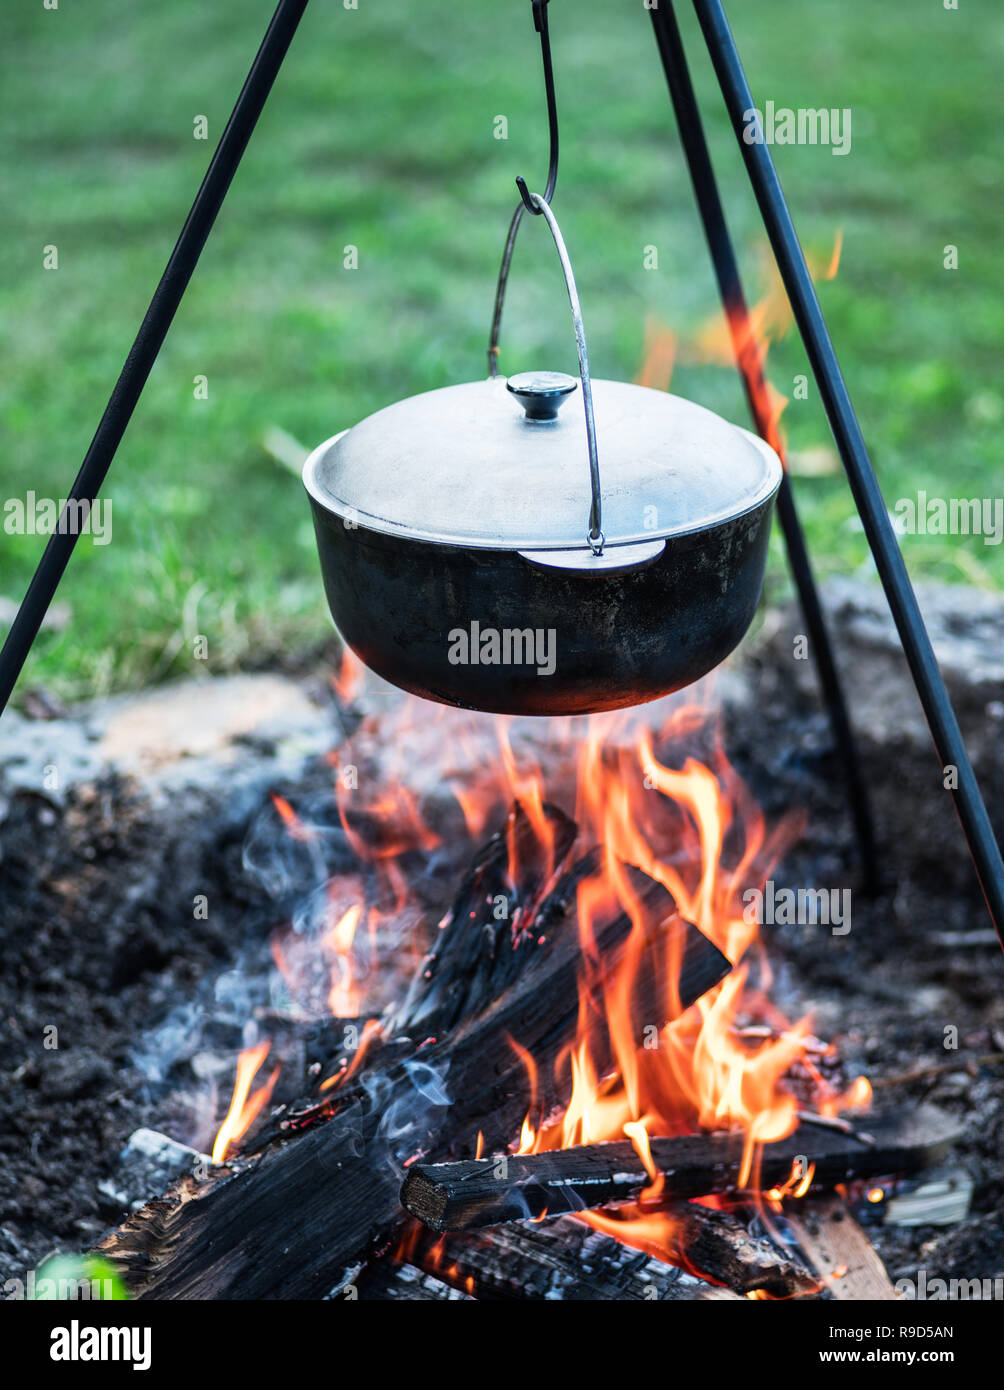 Cooking in the open-air. Cauldron over the campfire. Stock Photo